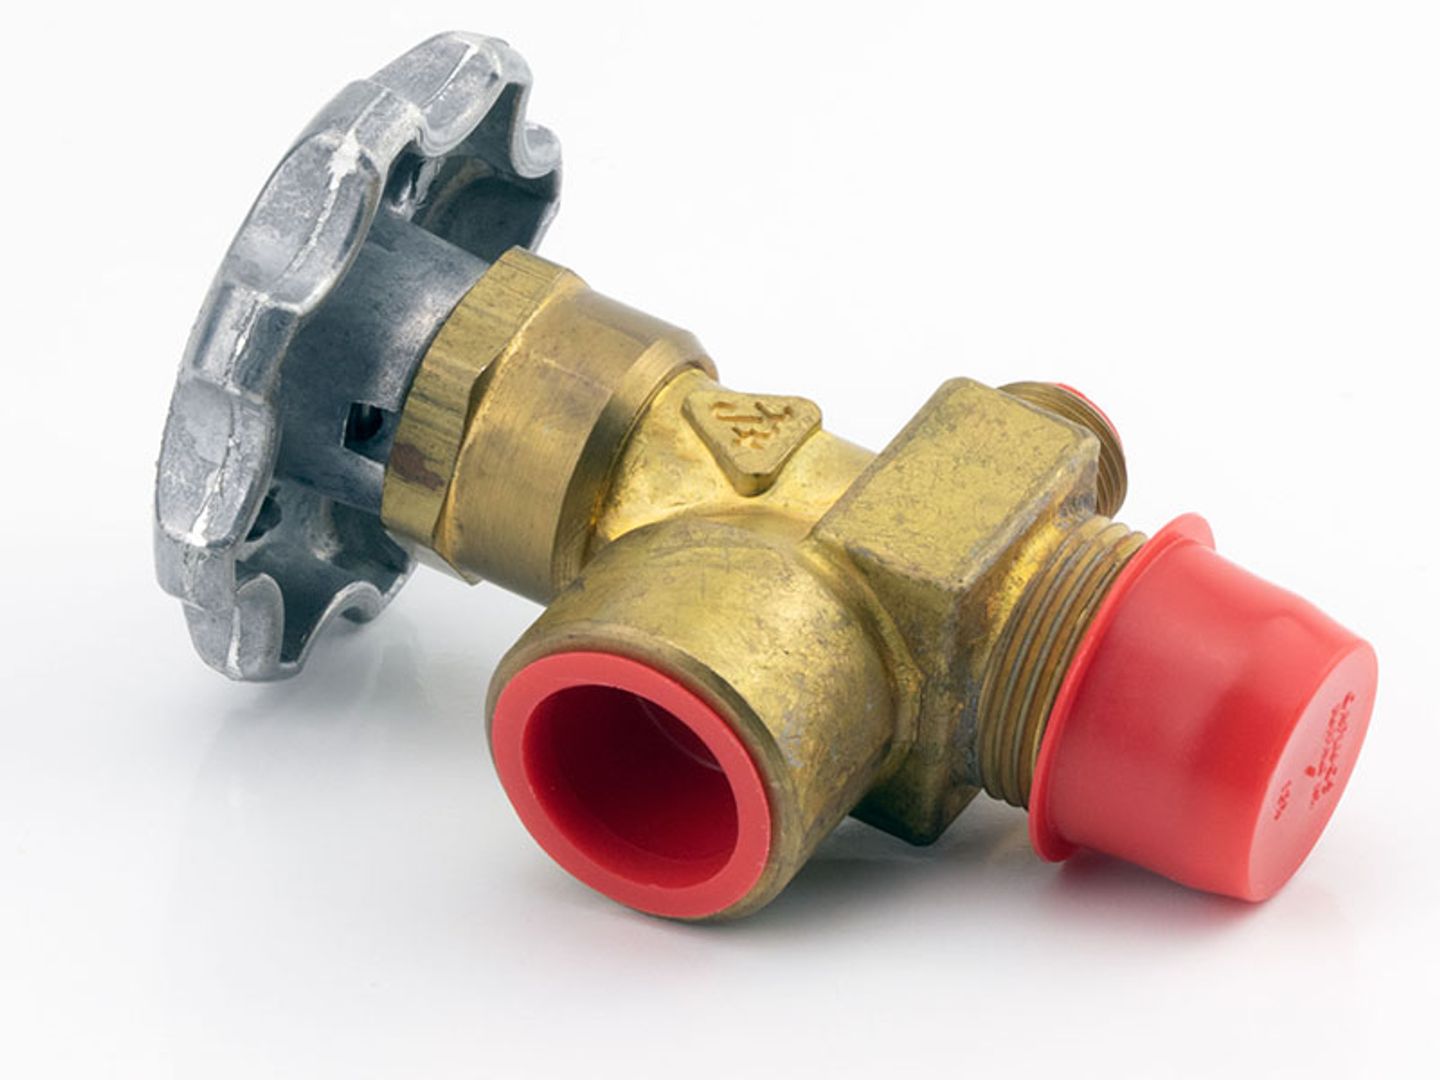 Caplugs T-11X Red Caps 1/2”  MPT or Plugs 0.78” to 0.90” diameter hole 